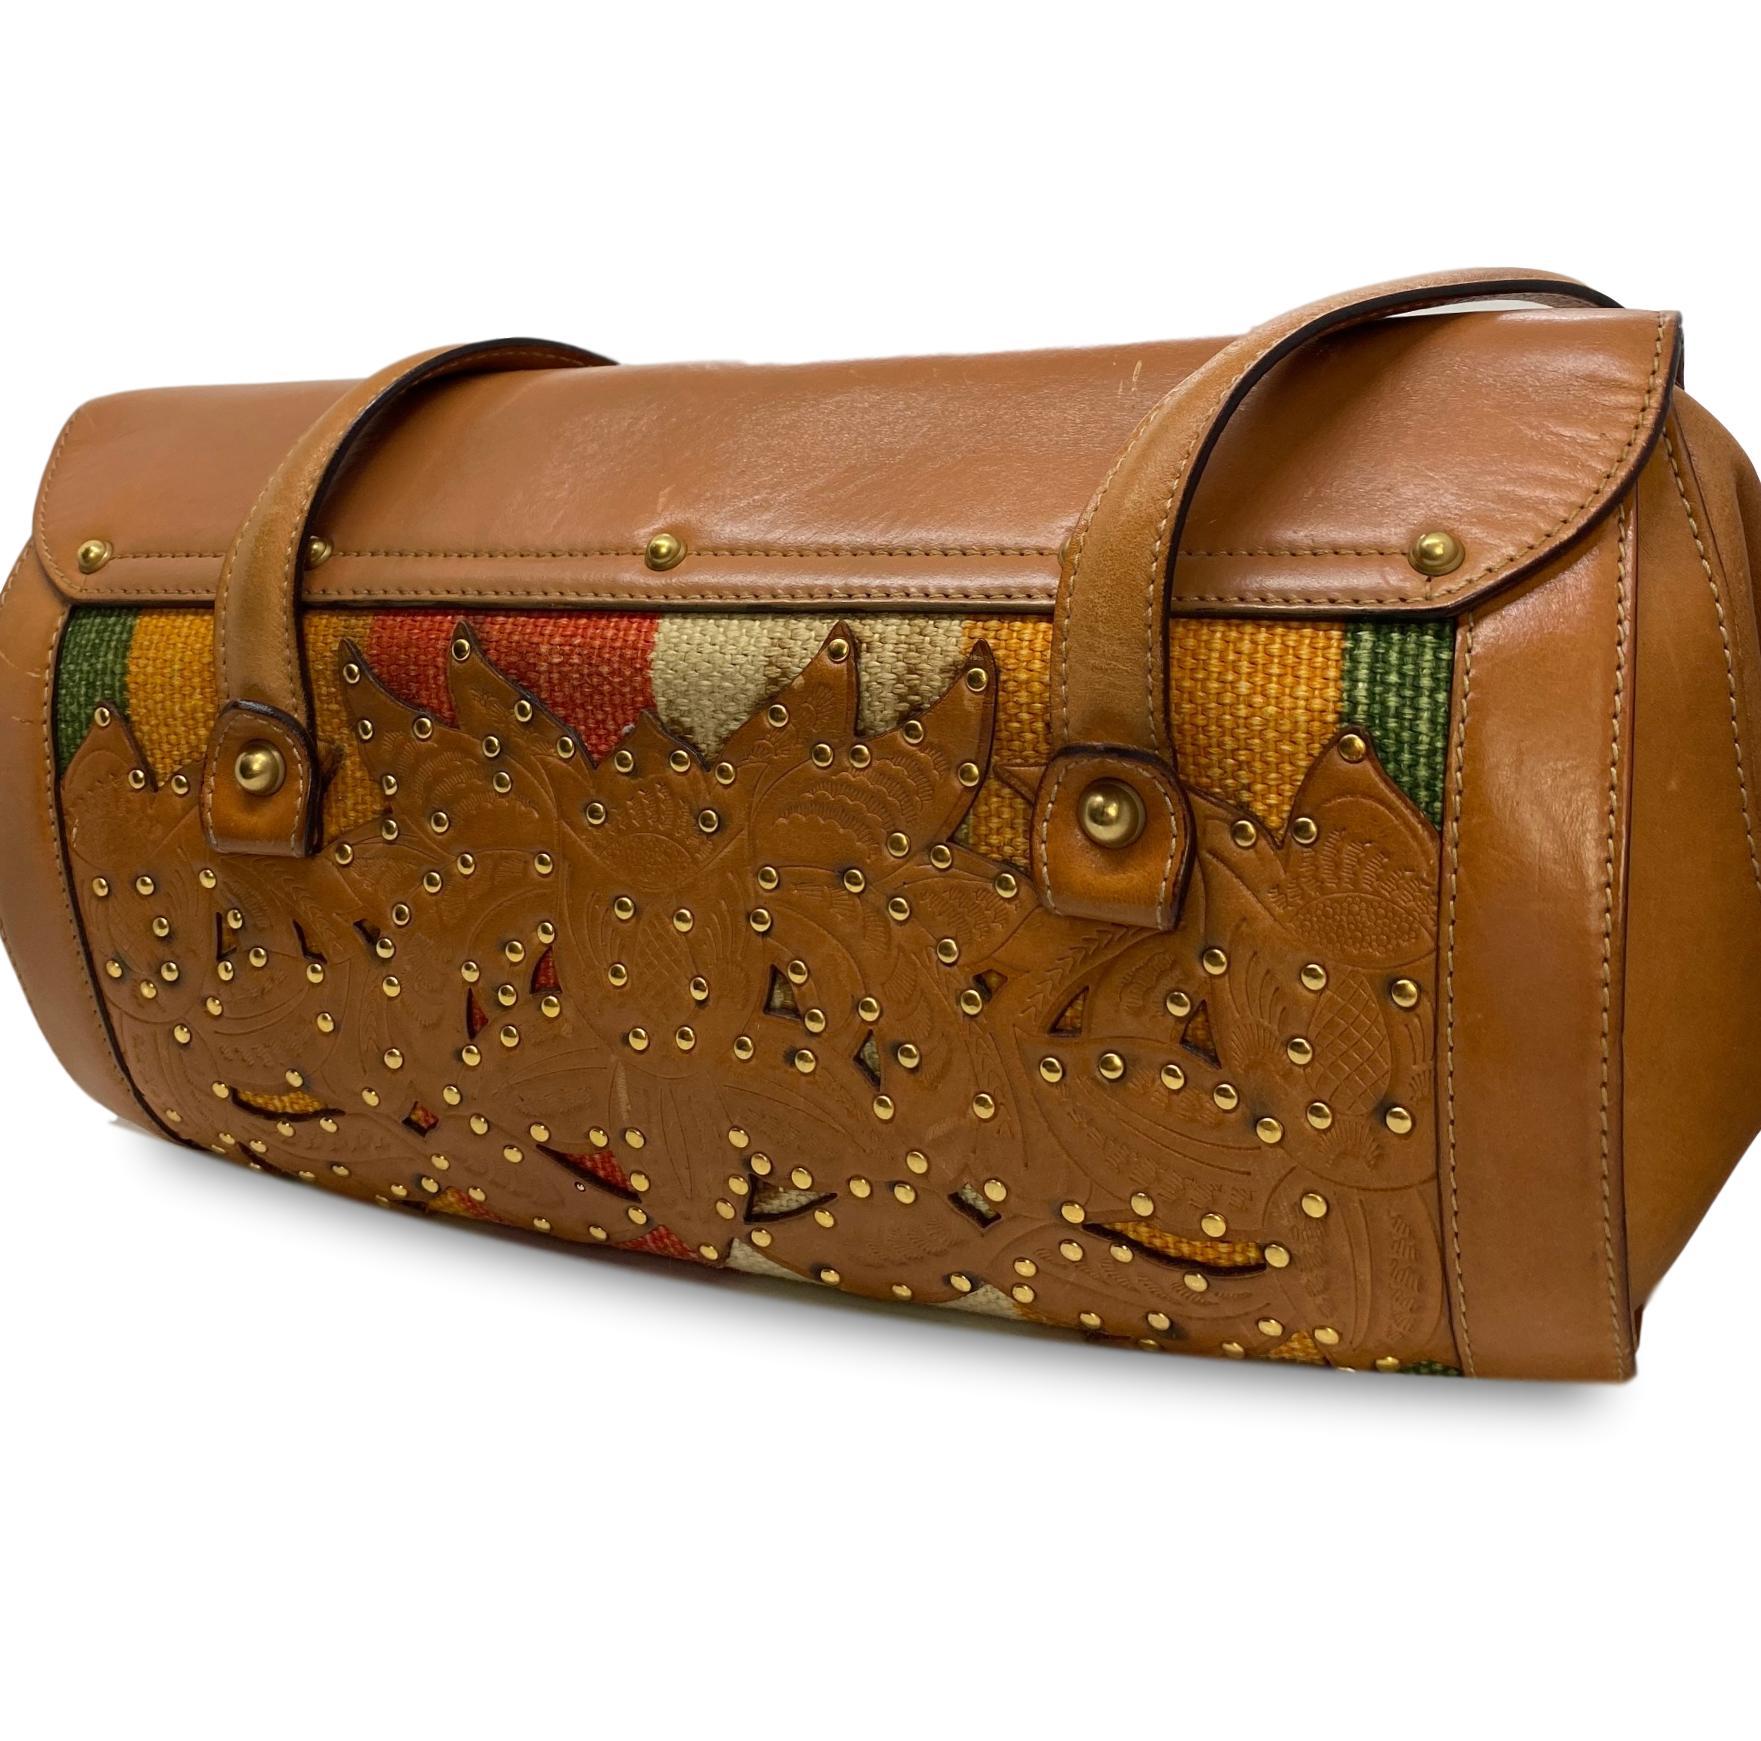 Brown Gucci Bamboo Bullet Leather Studded Limited Edition Tri-Color Handbag.